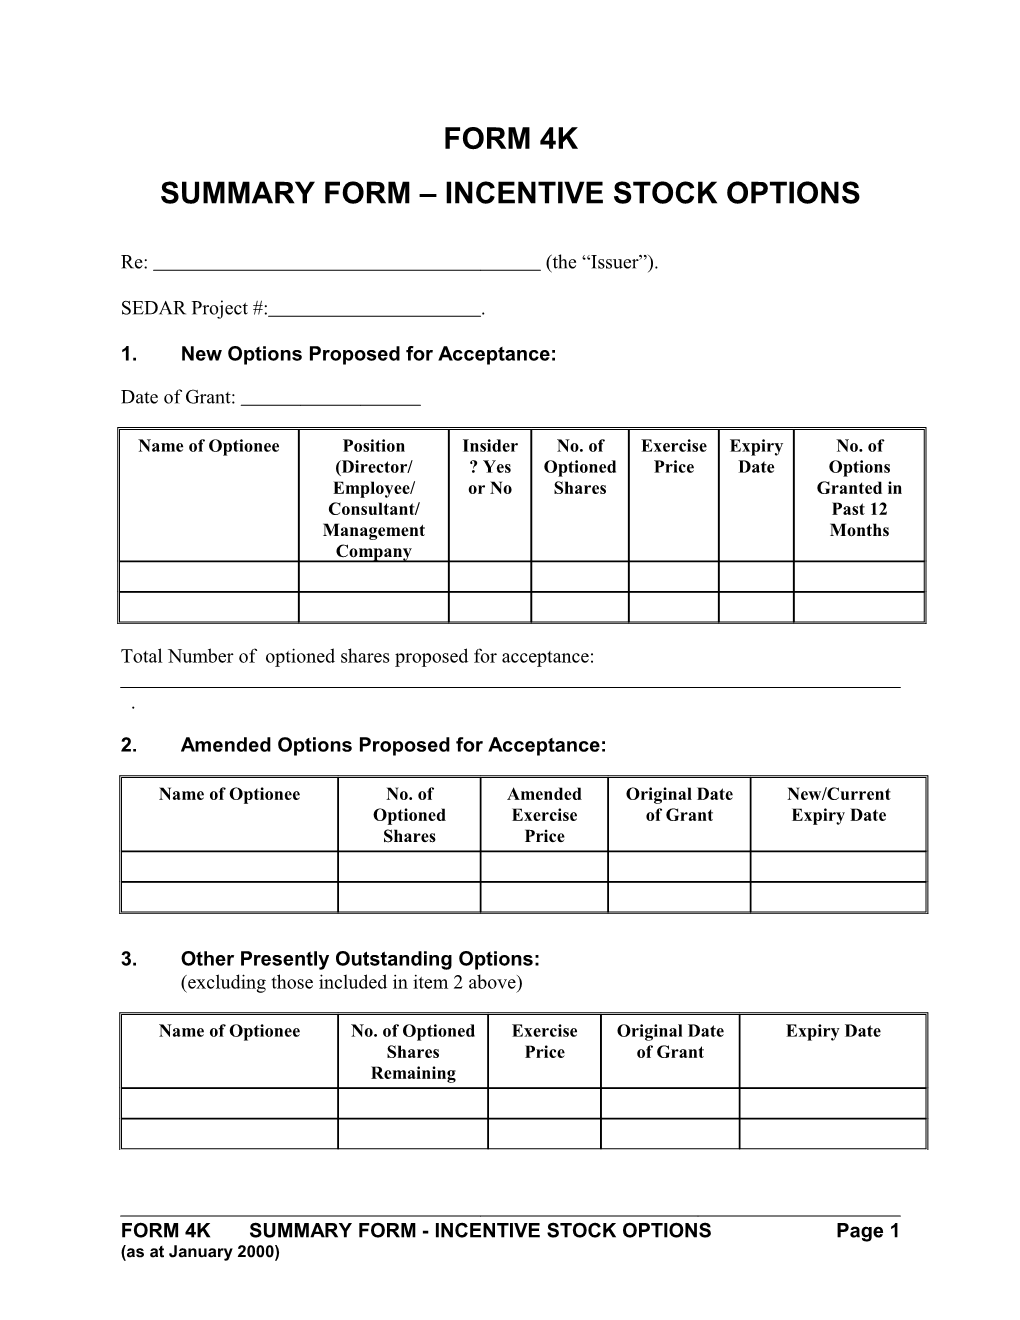 Summary Form Incentive Stock Options